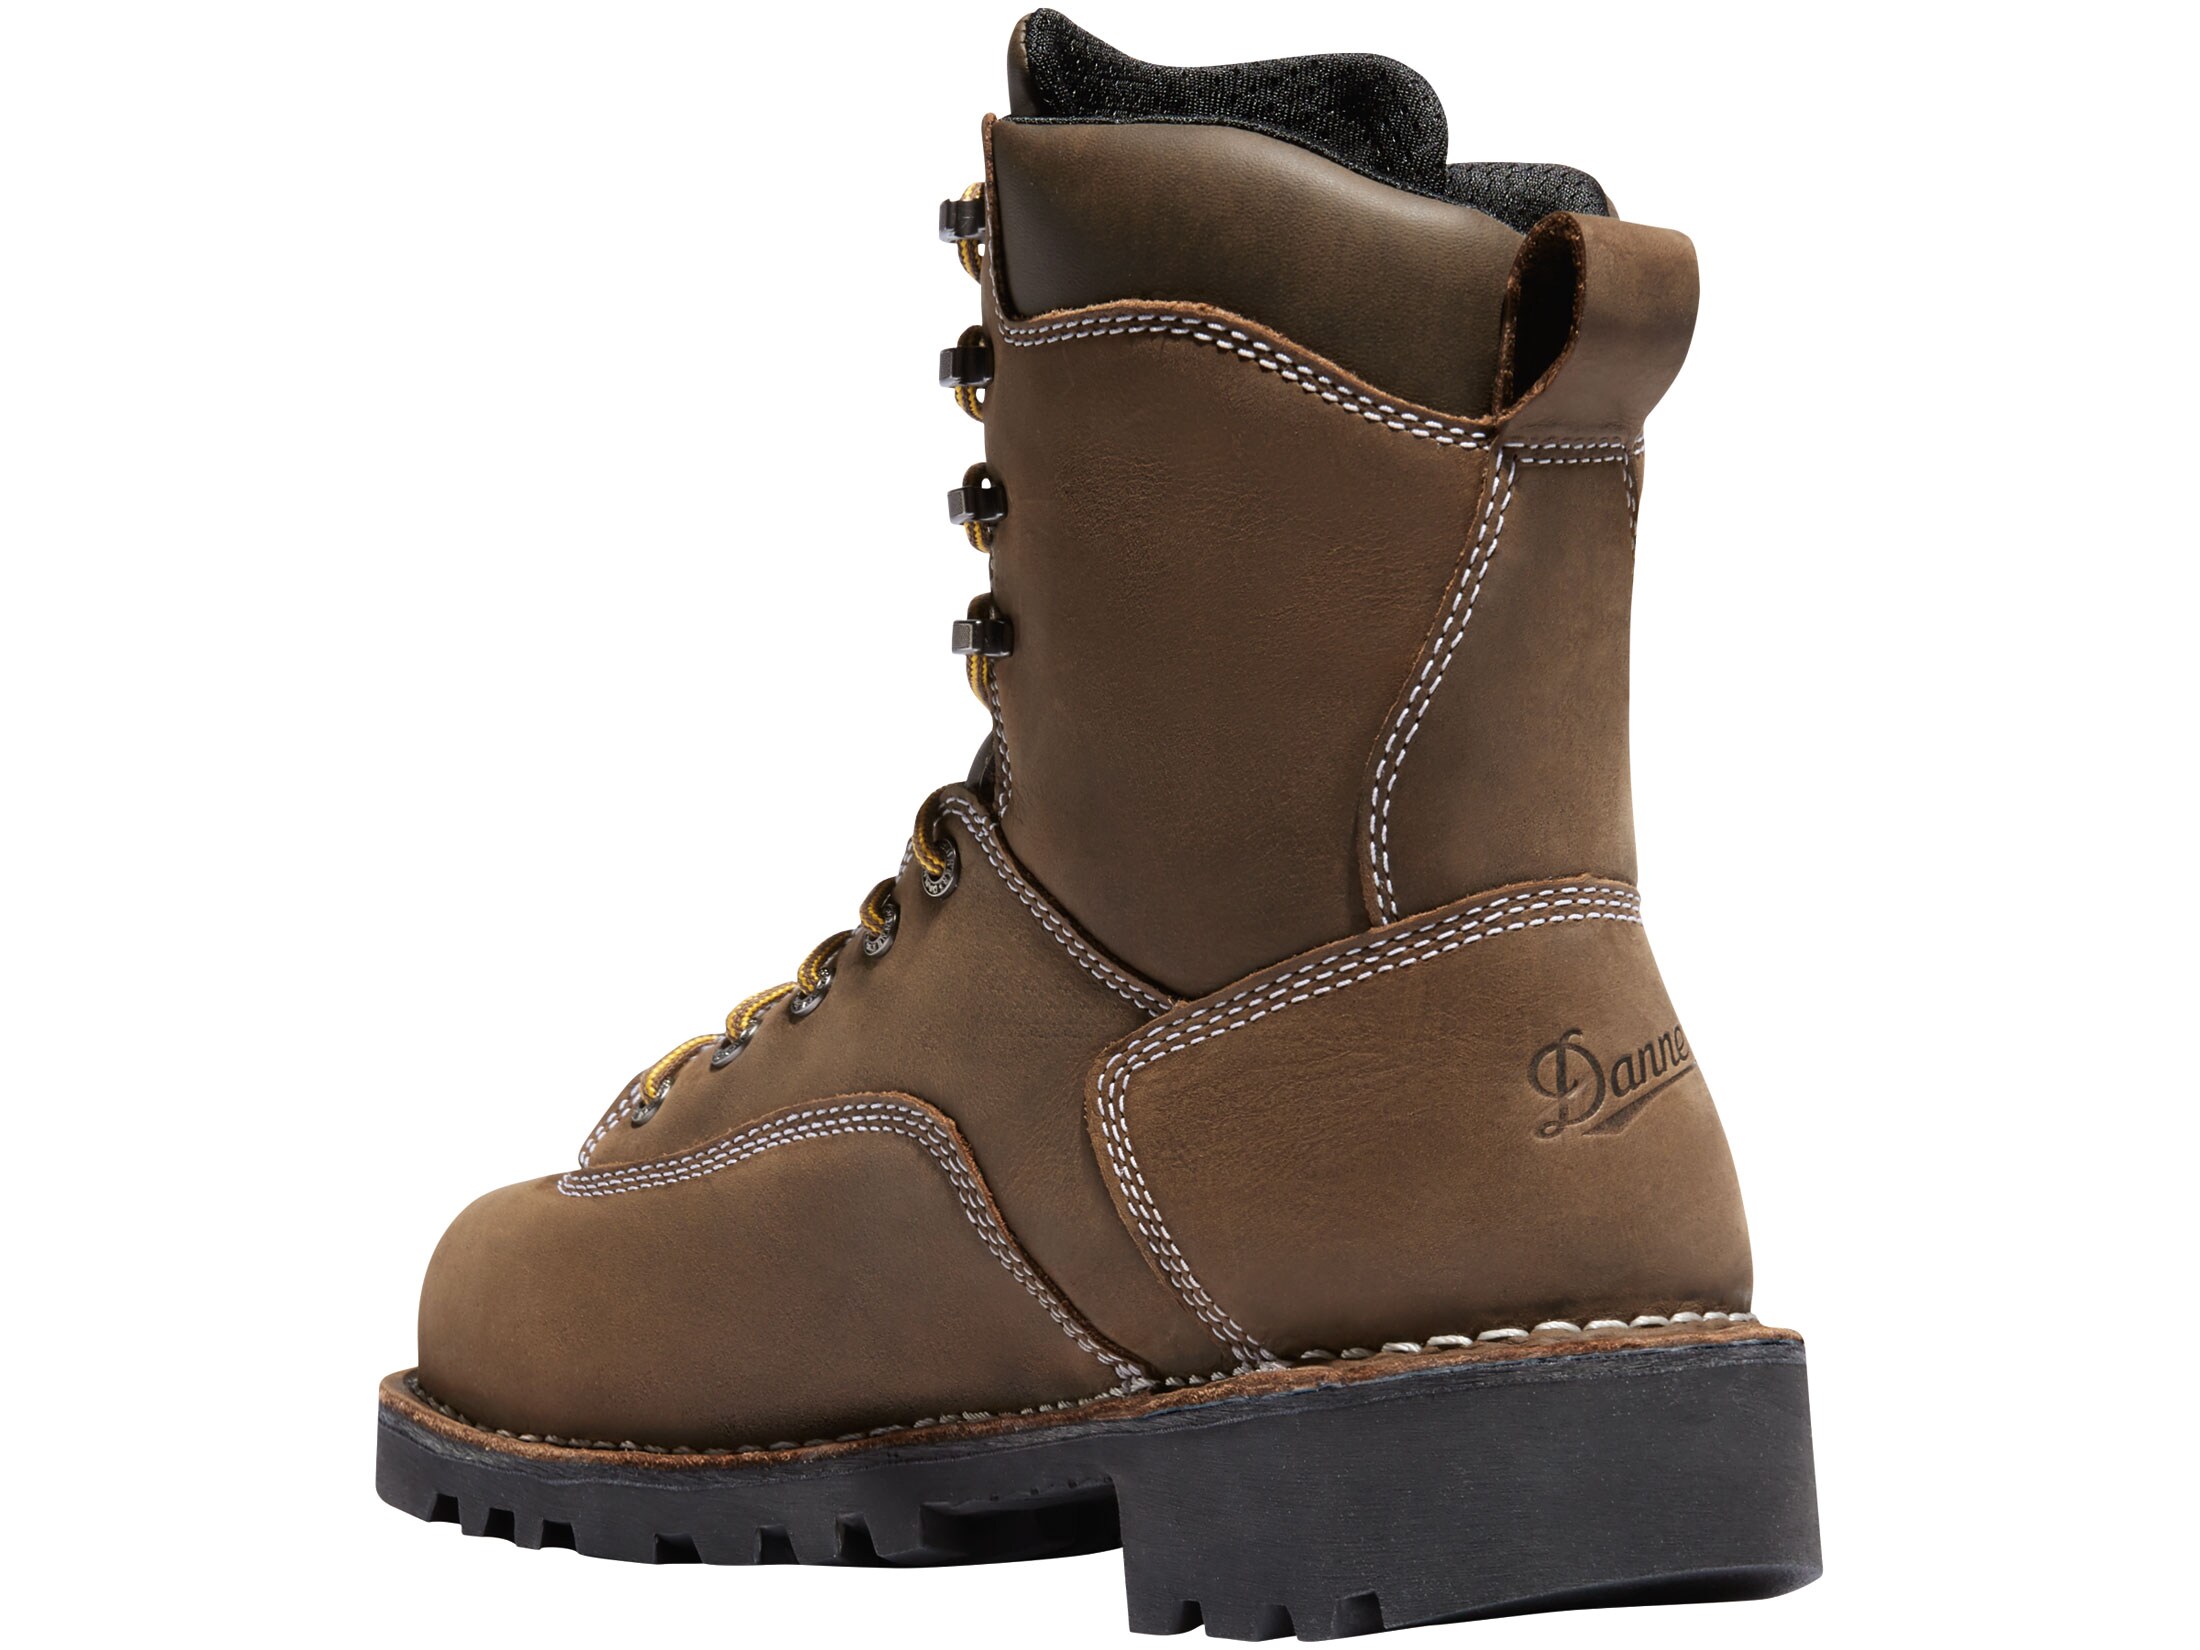 Danner Men's 14224 Gritstone 8" Brown Leather EH Waterproof Safety Shoes Boots 